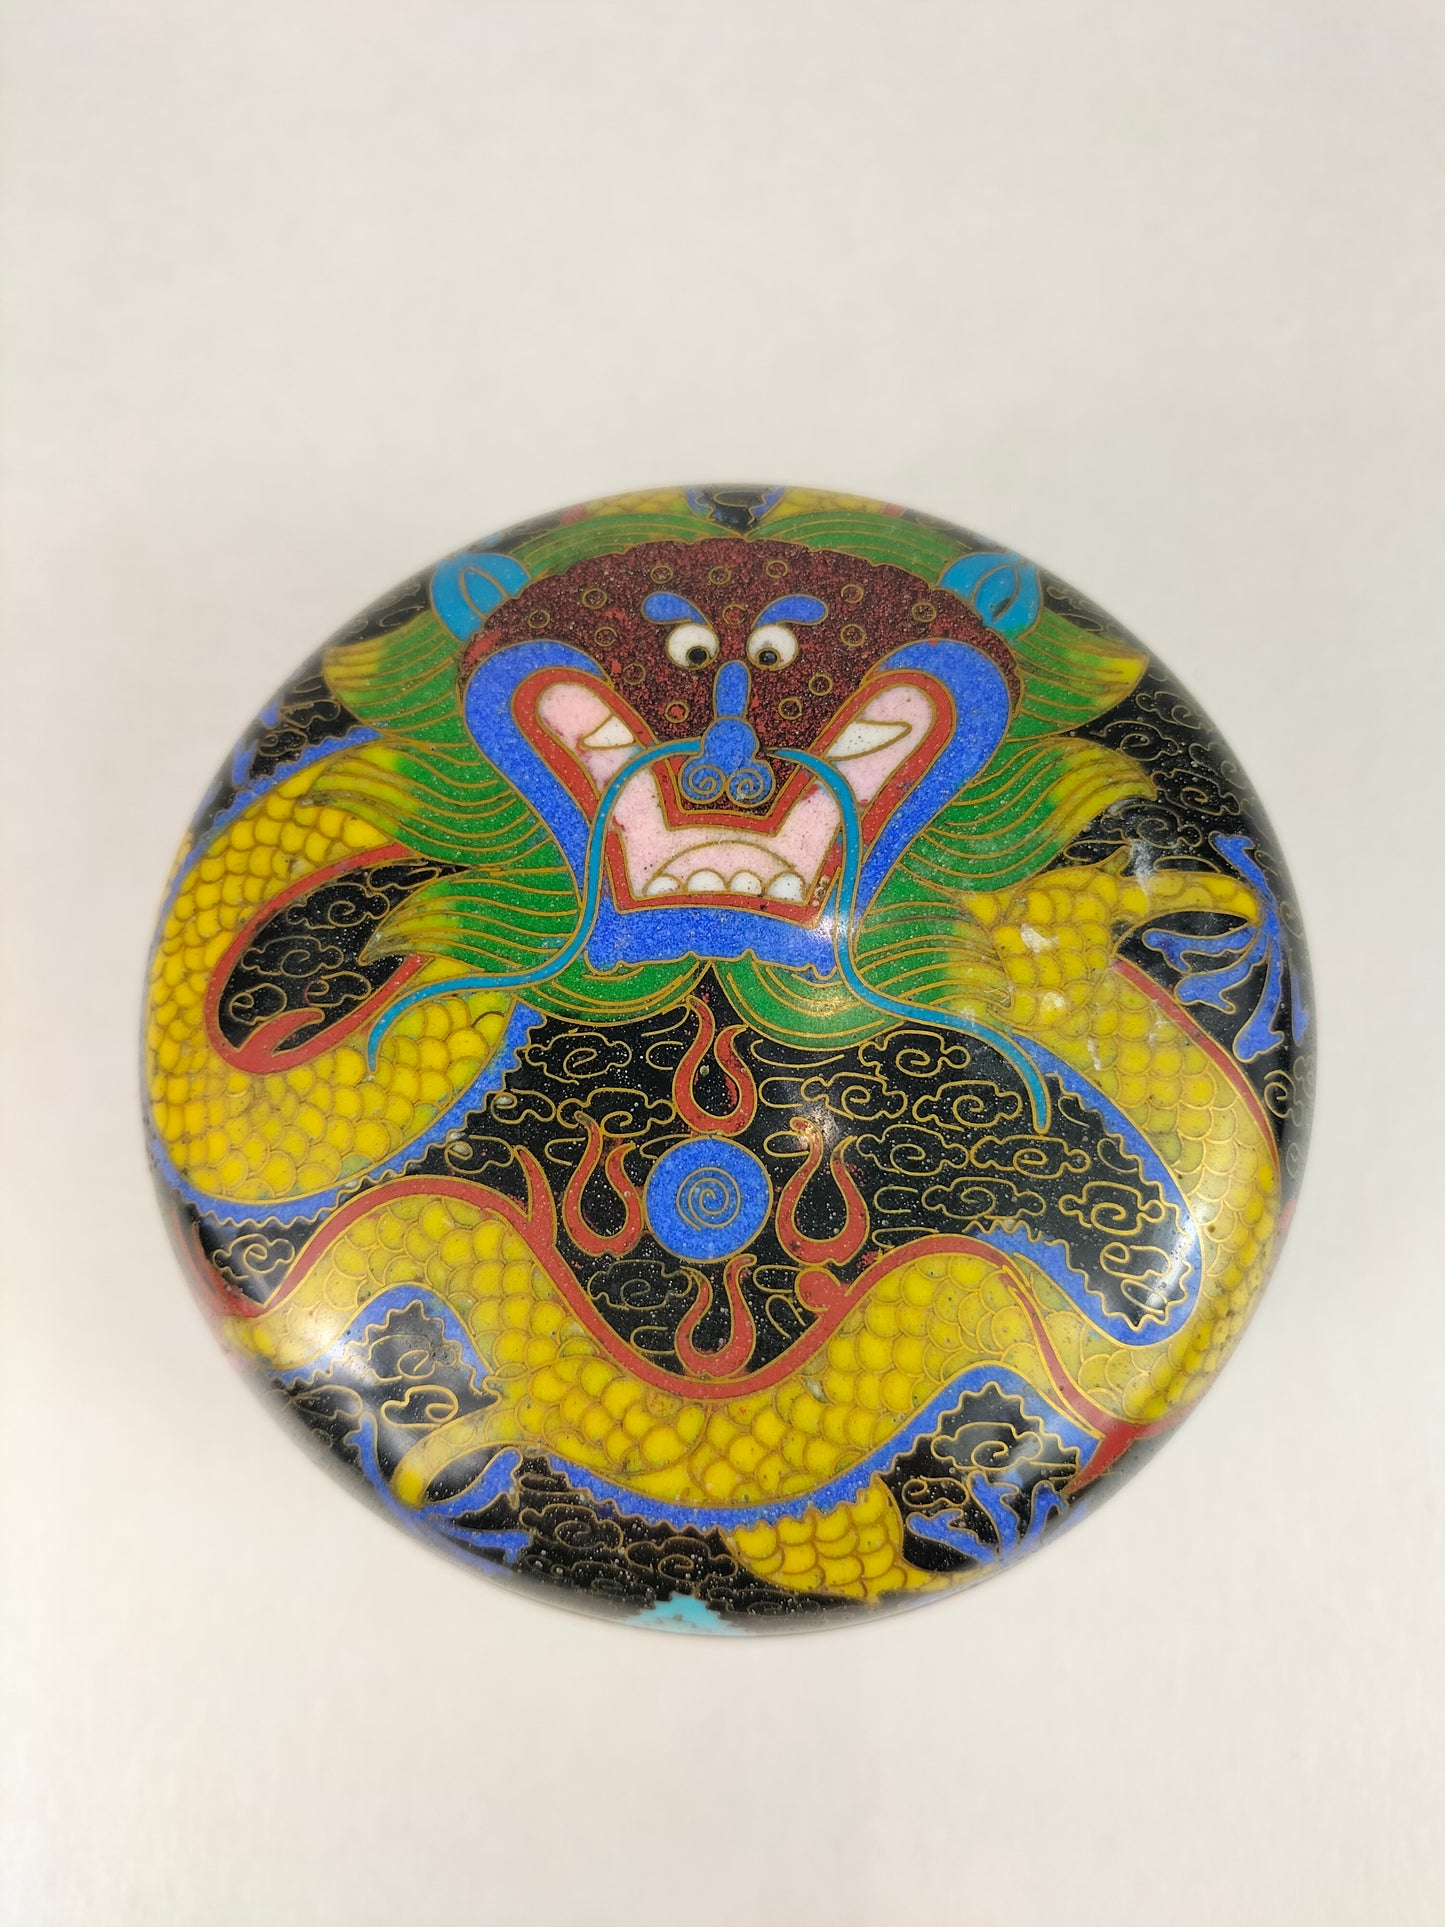 Chinese cloisonne lidded box decorated with an Imperial dragon // Republic Period (1912-1949)